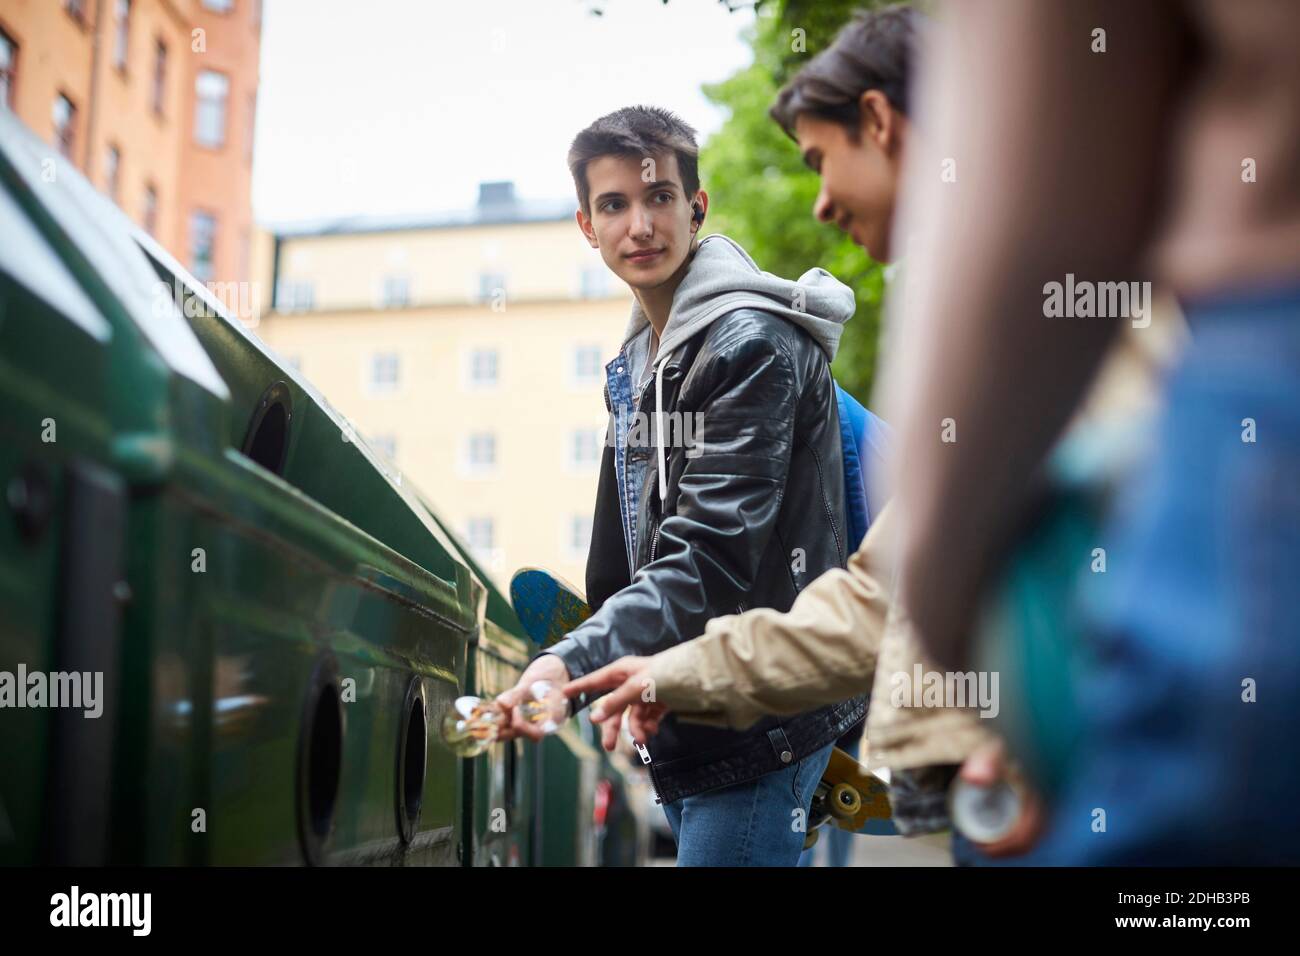 Teenage boy looking at friend while throwing waste in garbage bin at recycling station Stock Photo